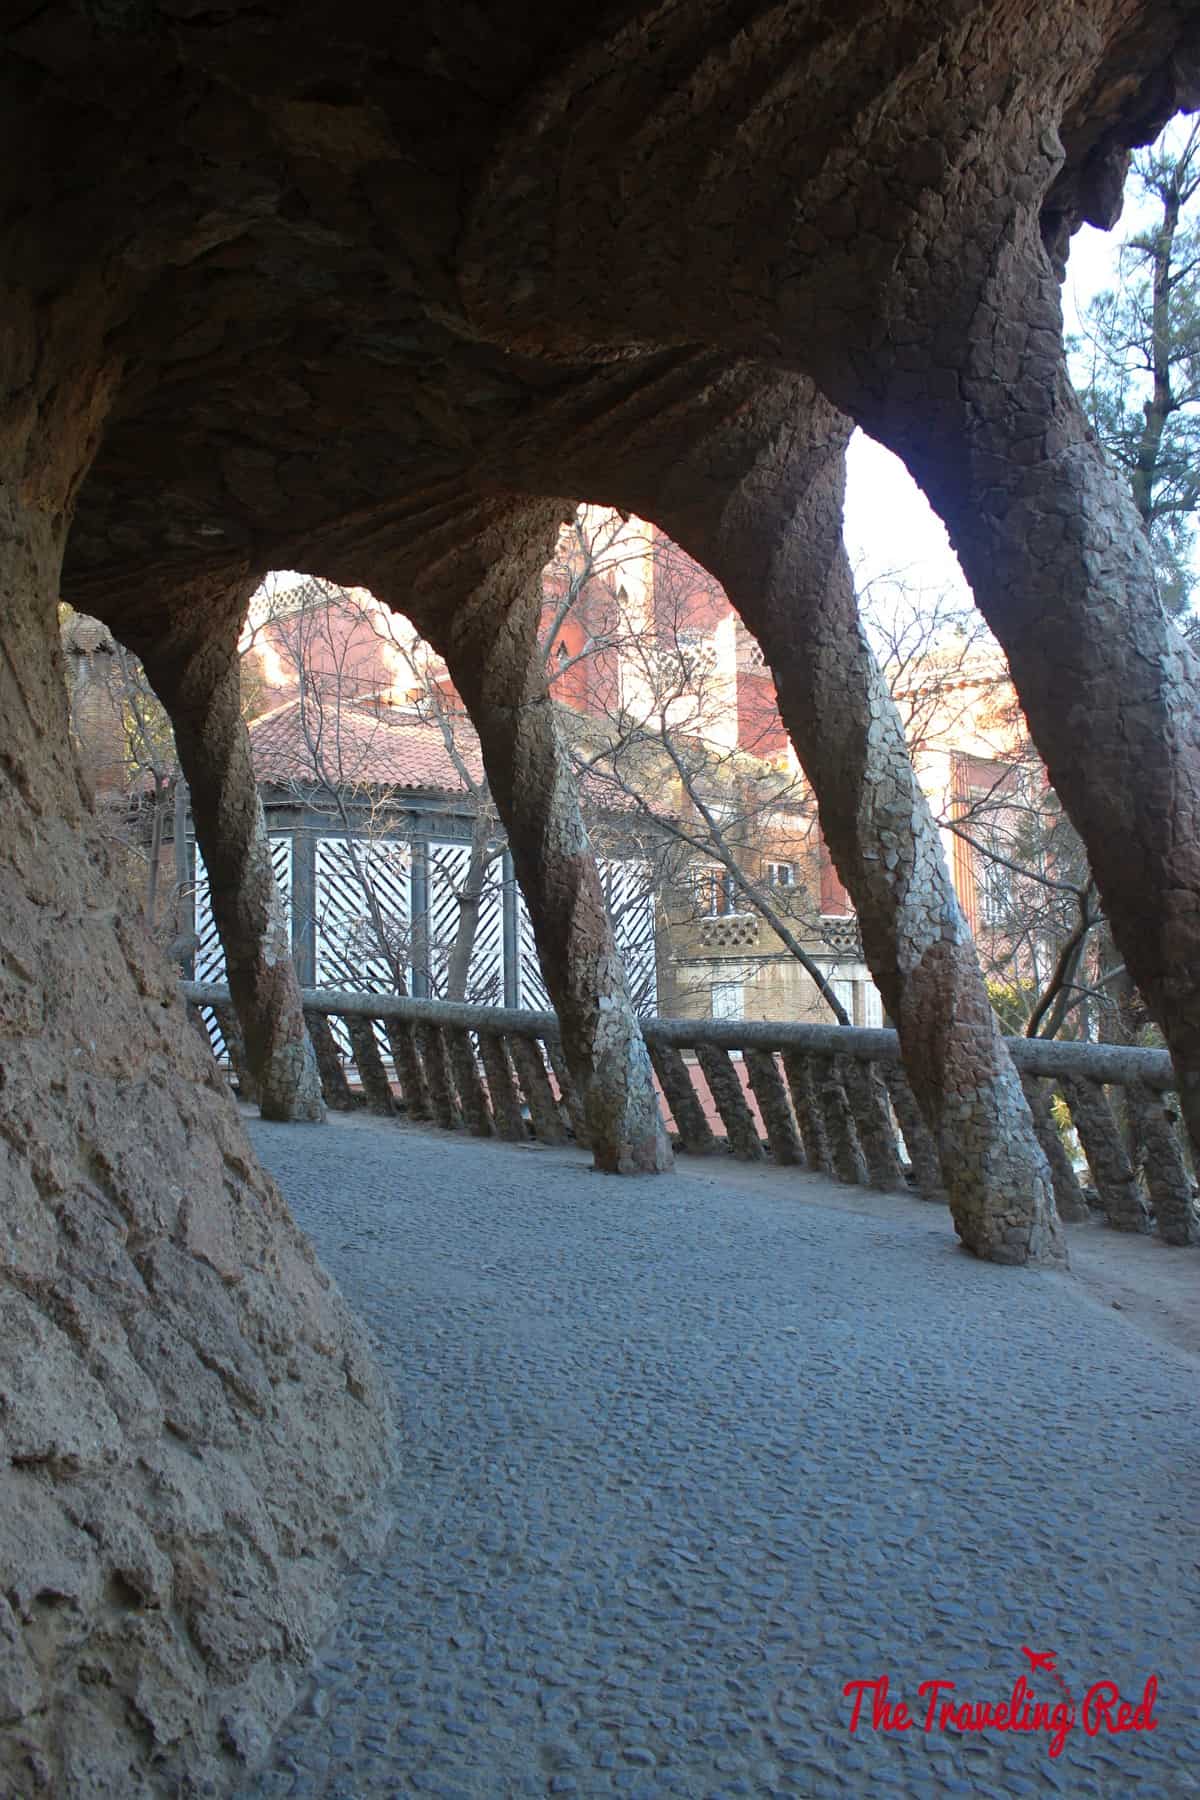 The Colonnaded Footpath in Parc Güell, the most famous park in Barcelona, Spain.